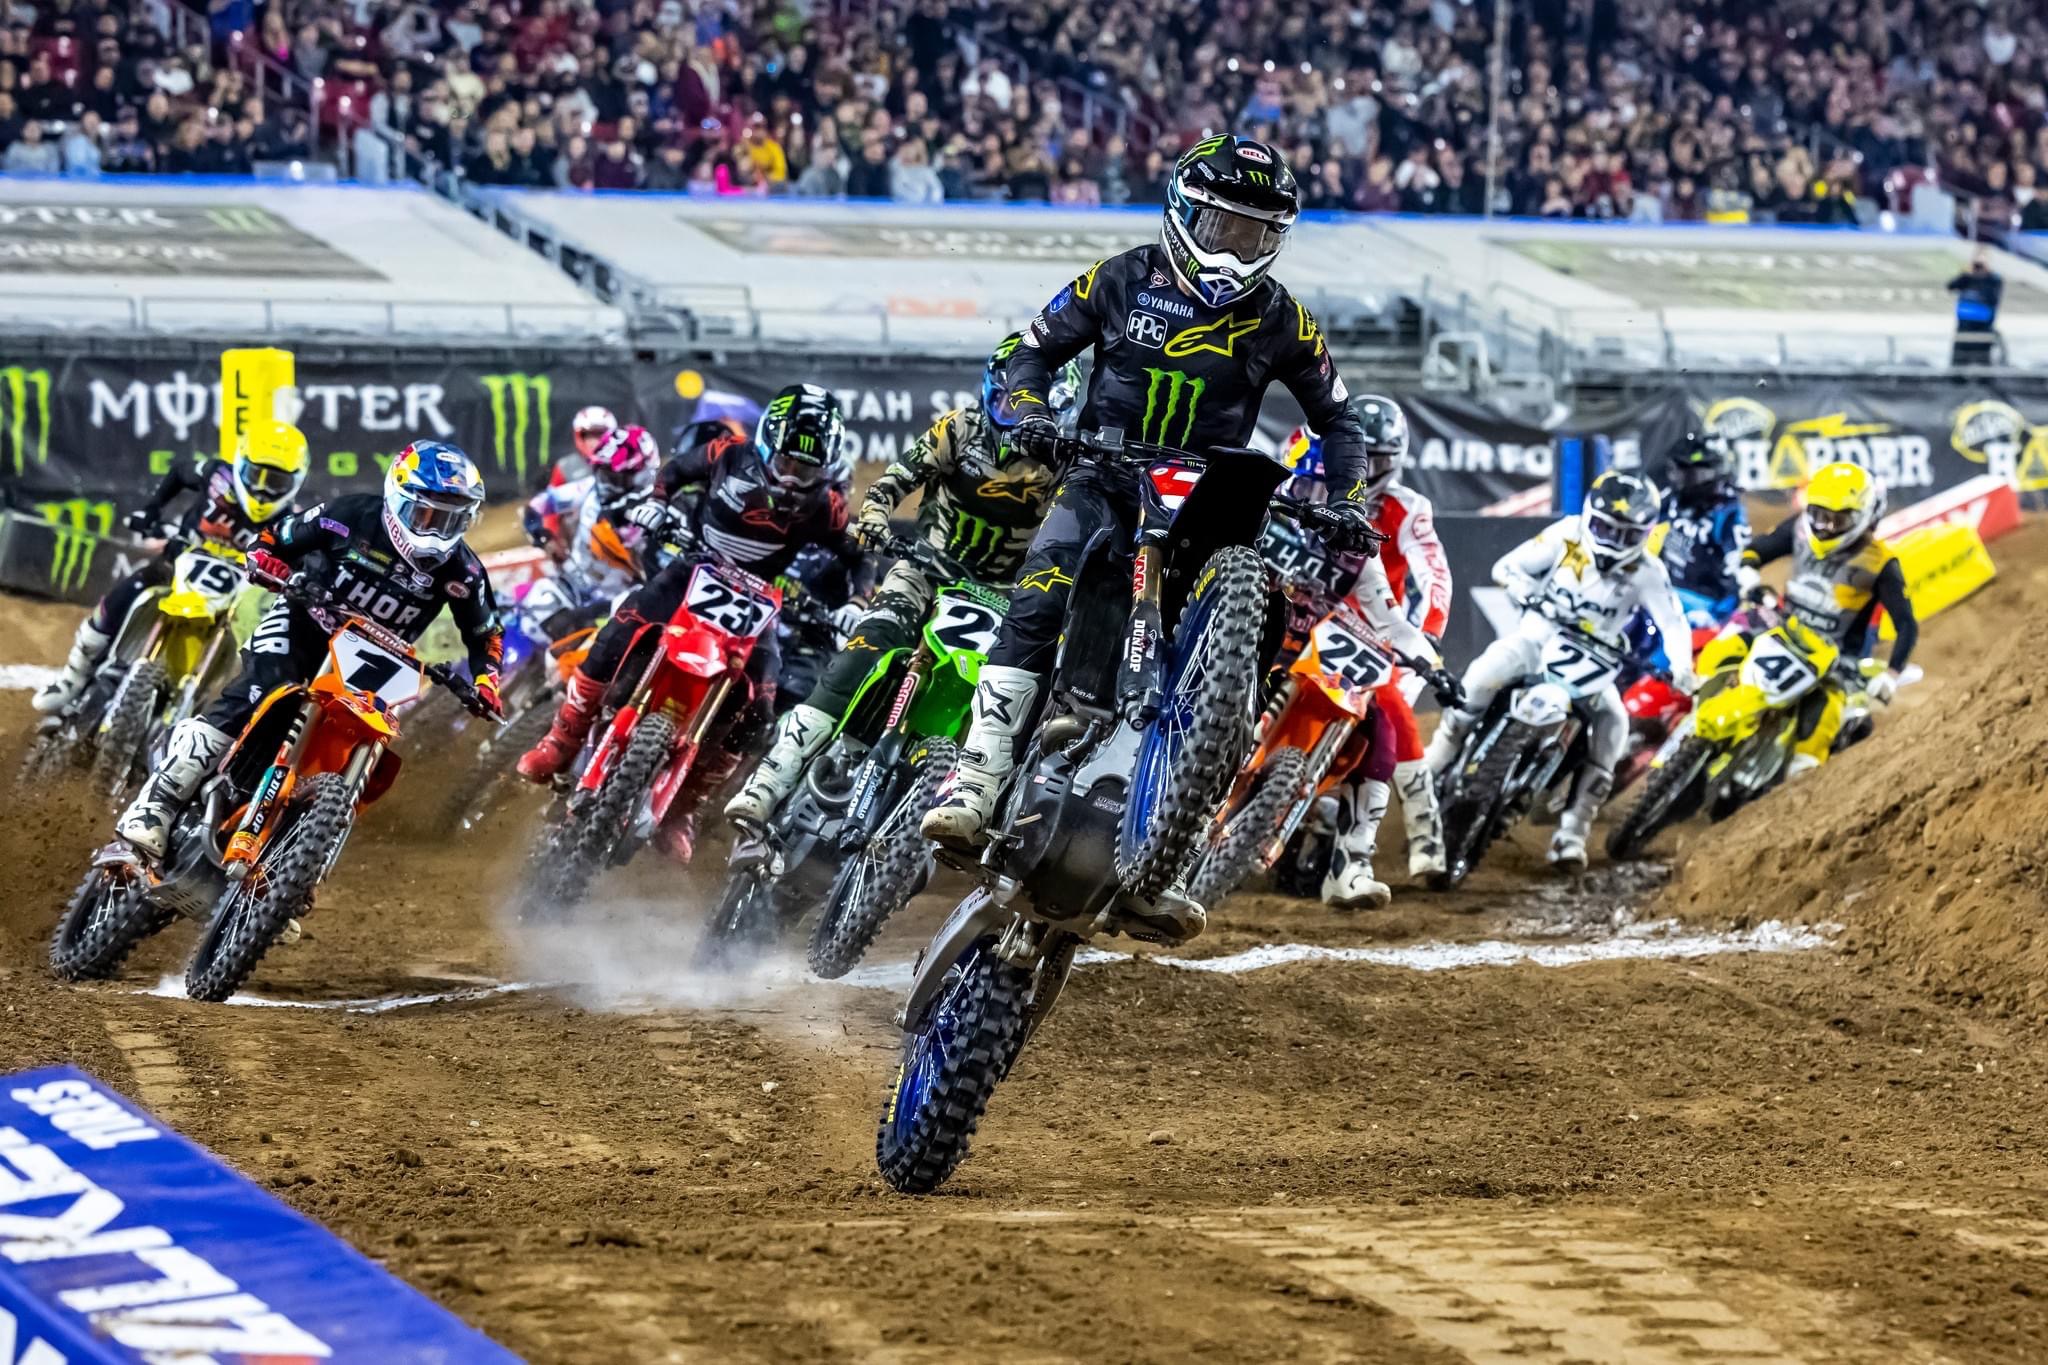 WILL TOMAC RACE IN INAUGURAL SUPERMOTOCROSS WORLD CHAMPIONSHIP?